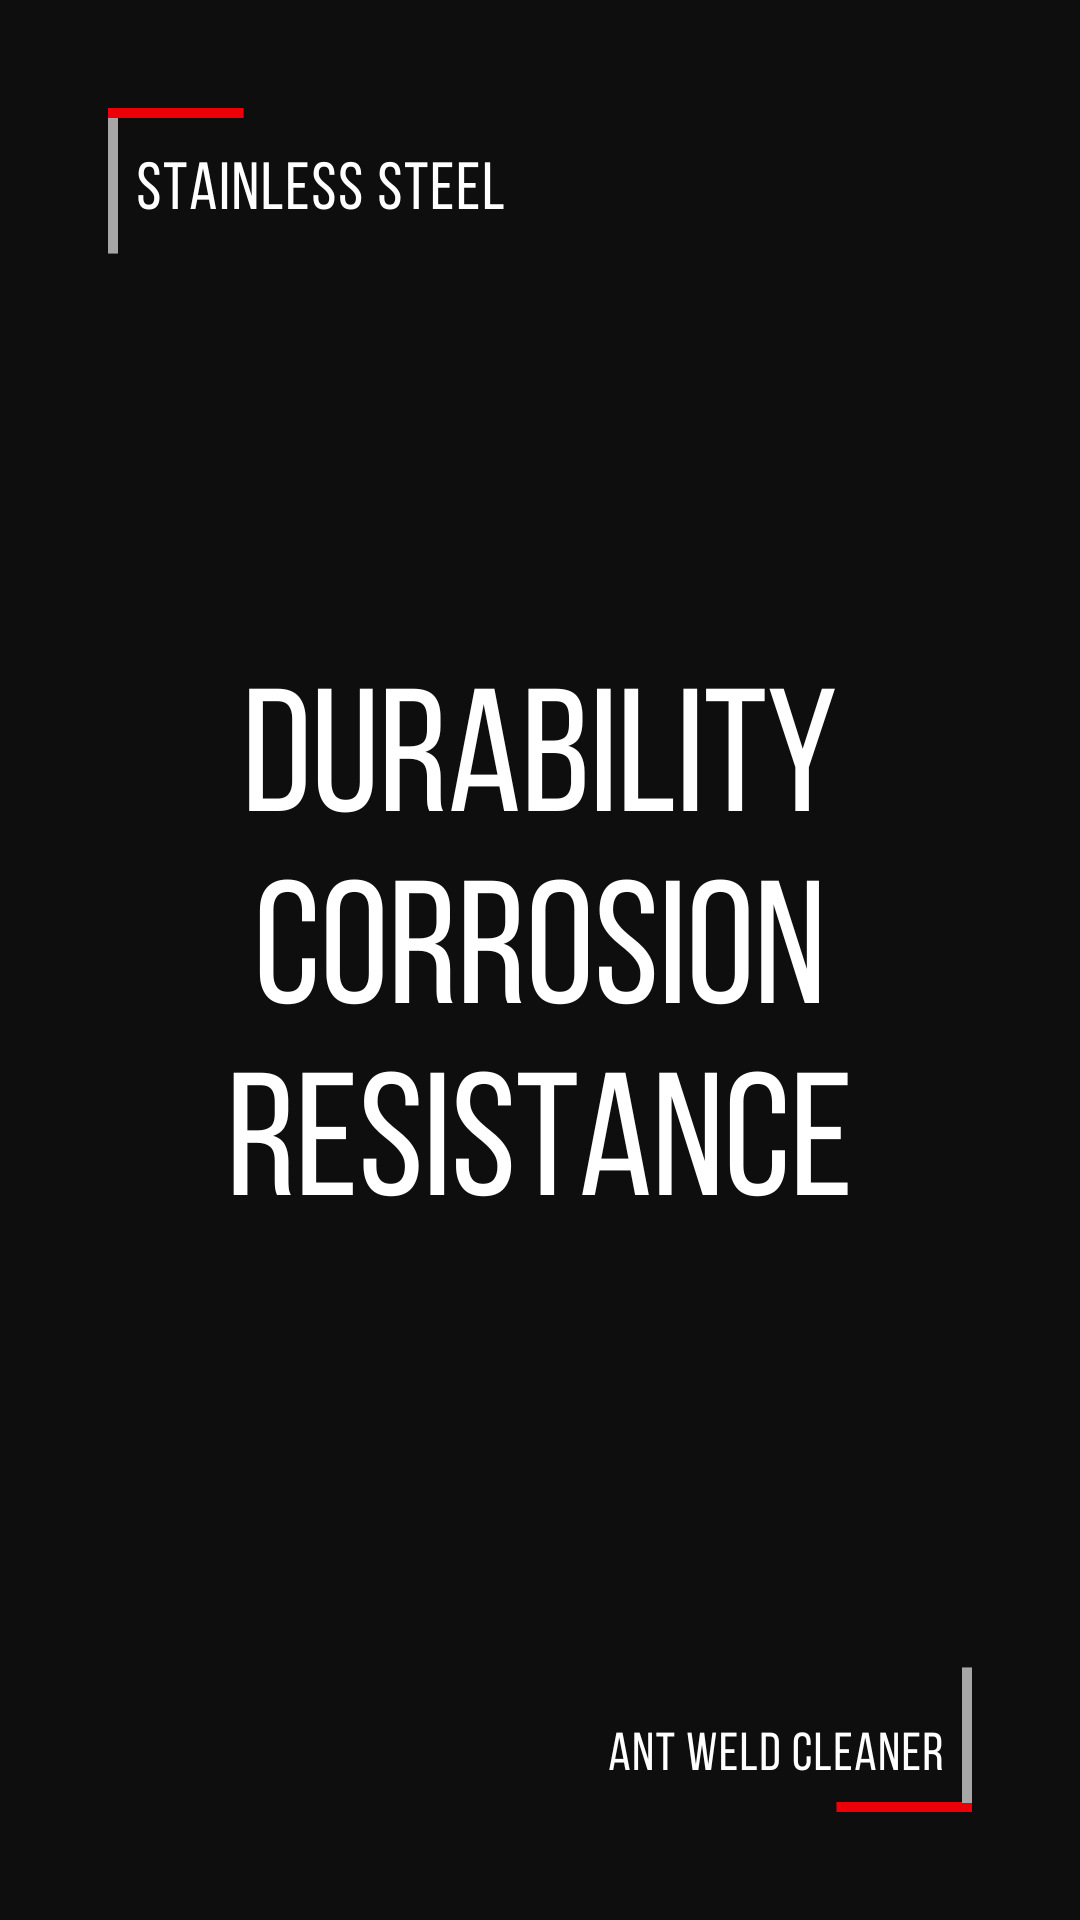 Durability and corrosion resistance